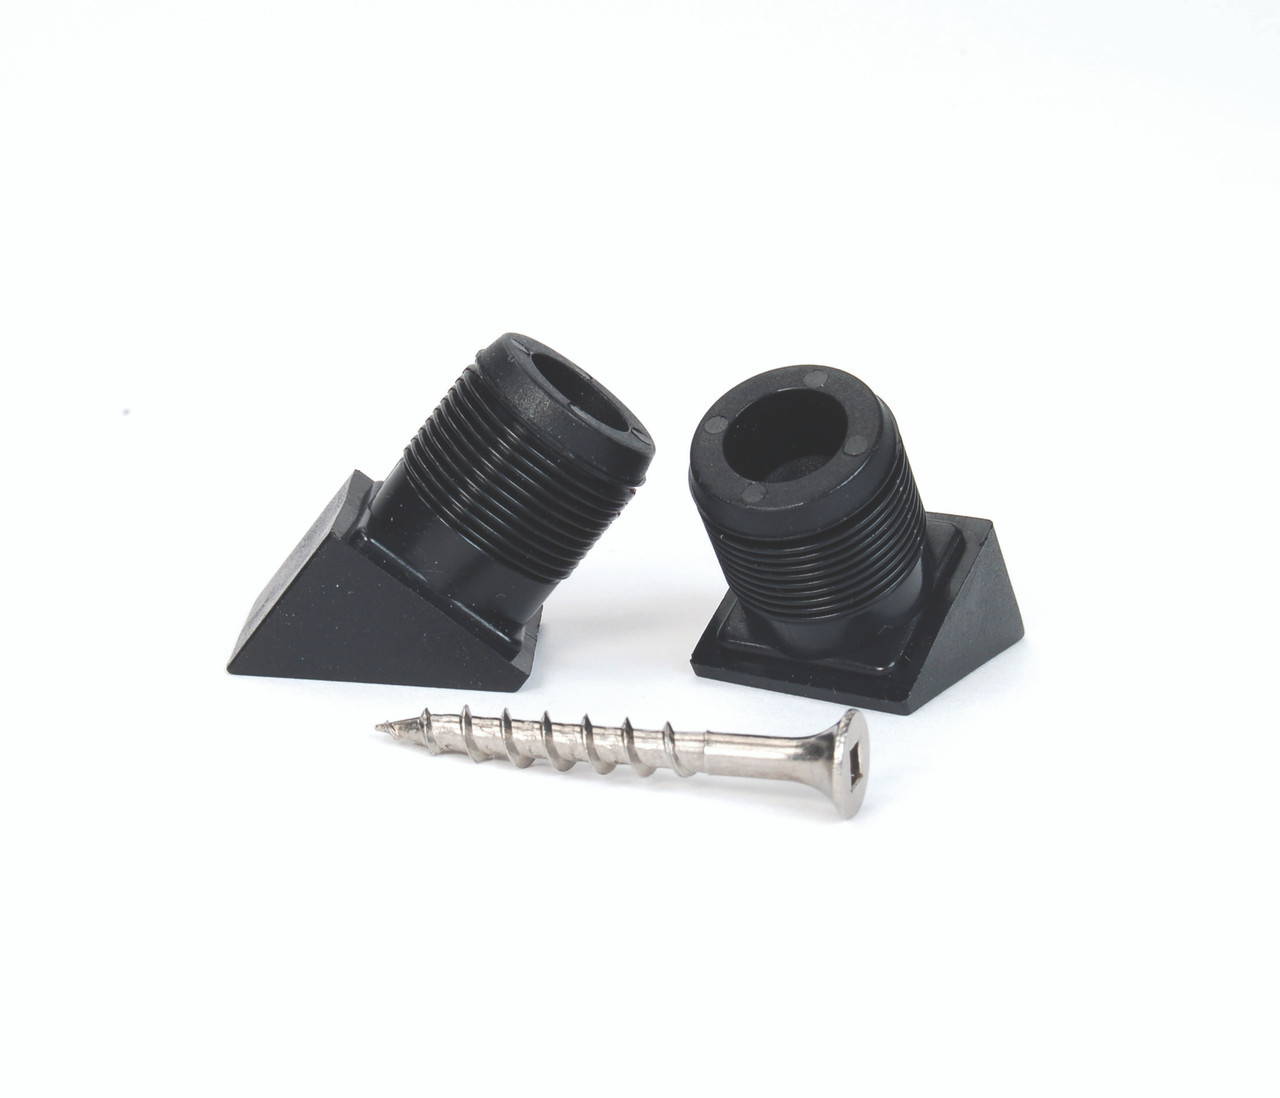 Square 3/4 Stair Baluster Connector (20 Ct Bag)